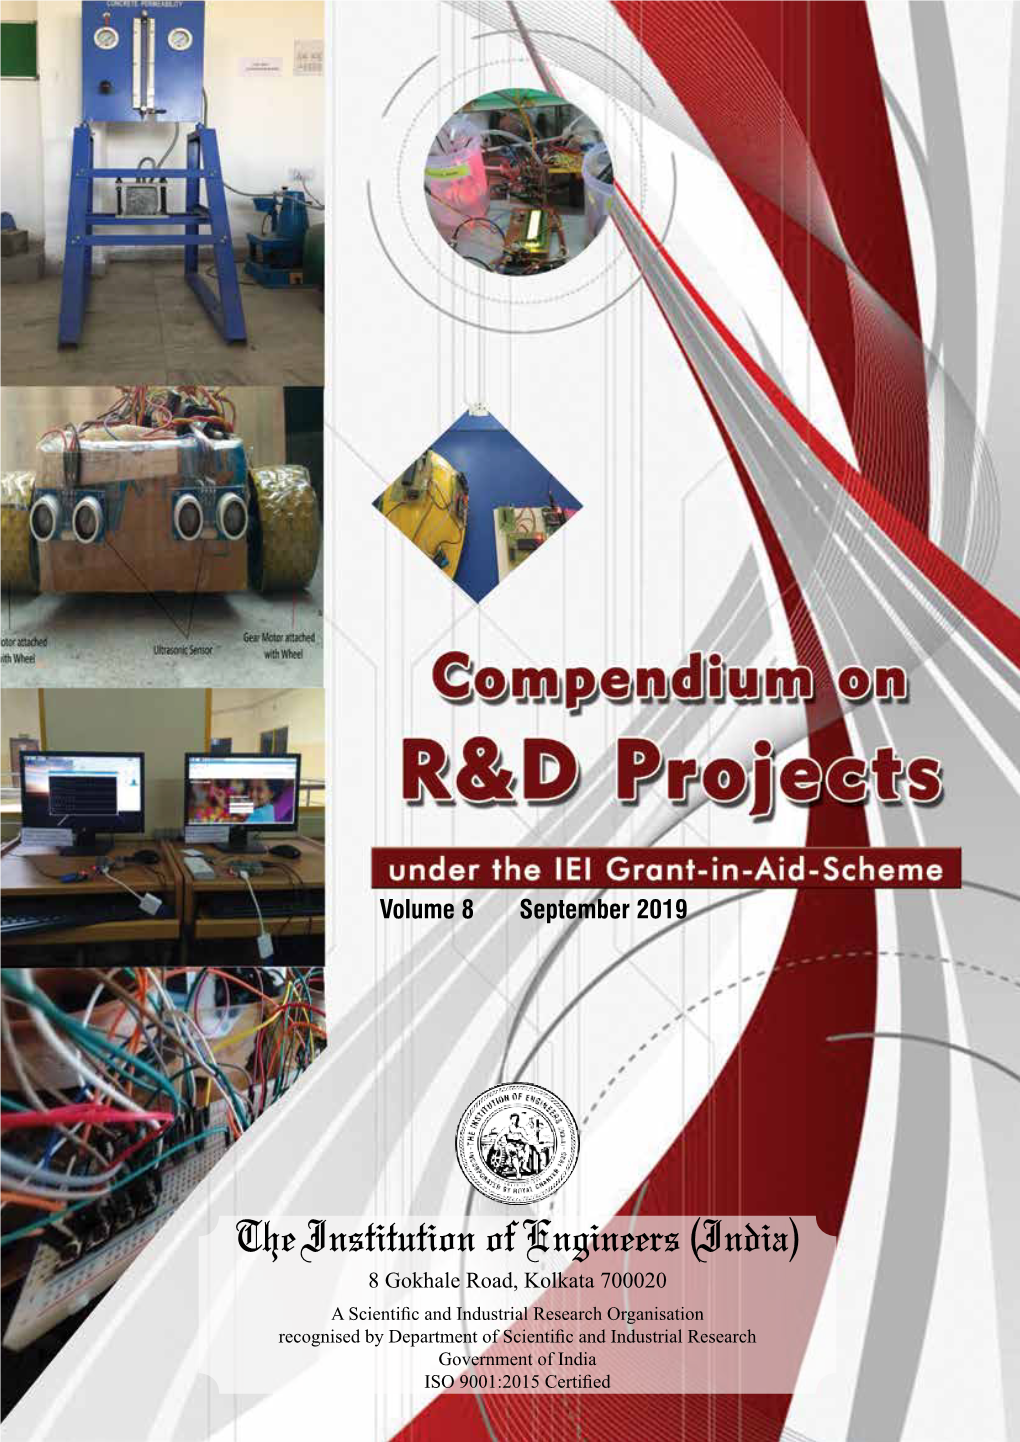 Compendium on R&D Projects Volume-8